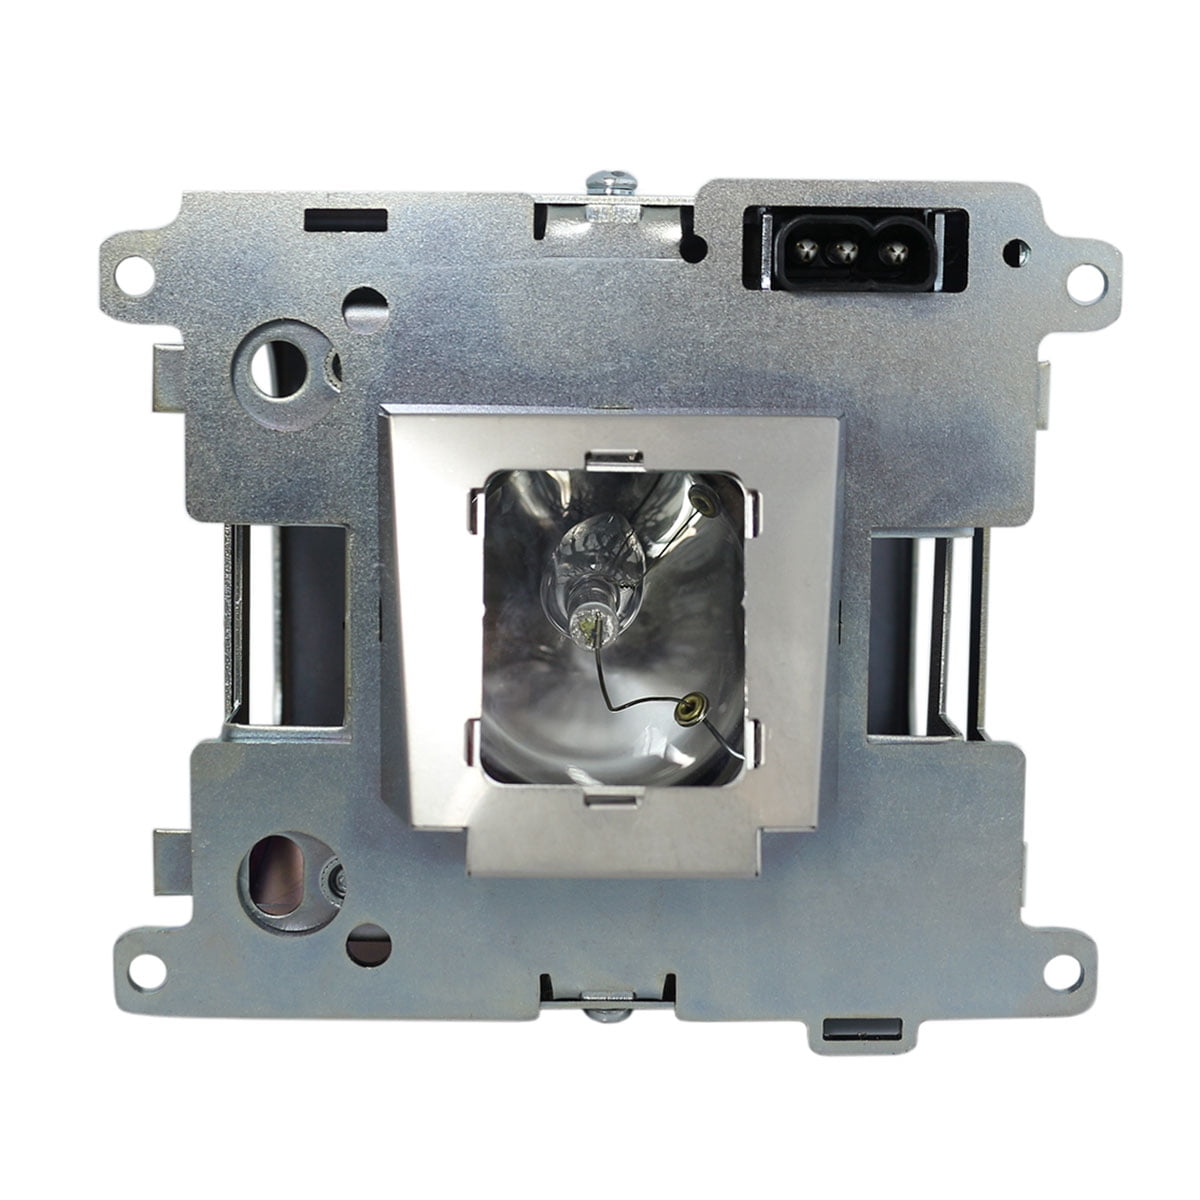 XpertMall Replacement Lamp Housing PROXIMA DT00491 Ushio Bulb Inside